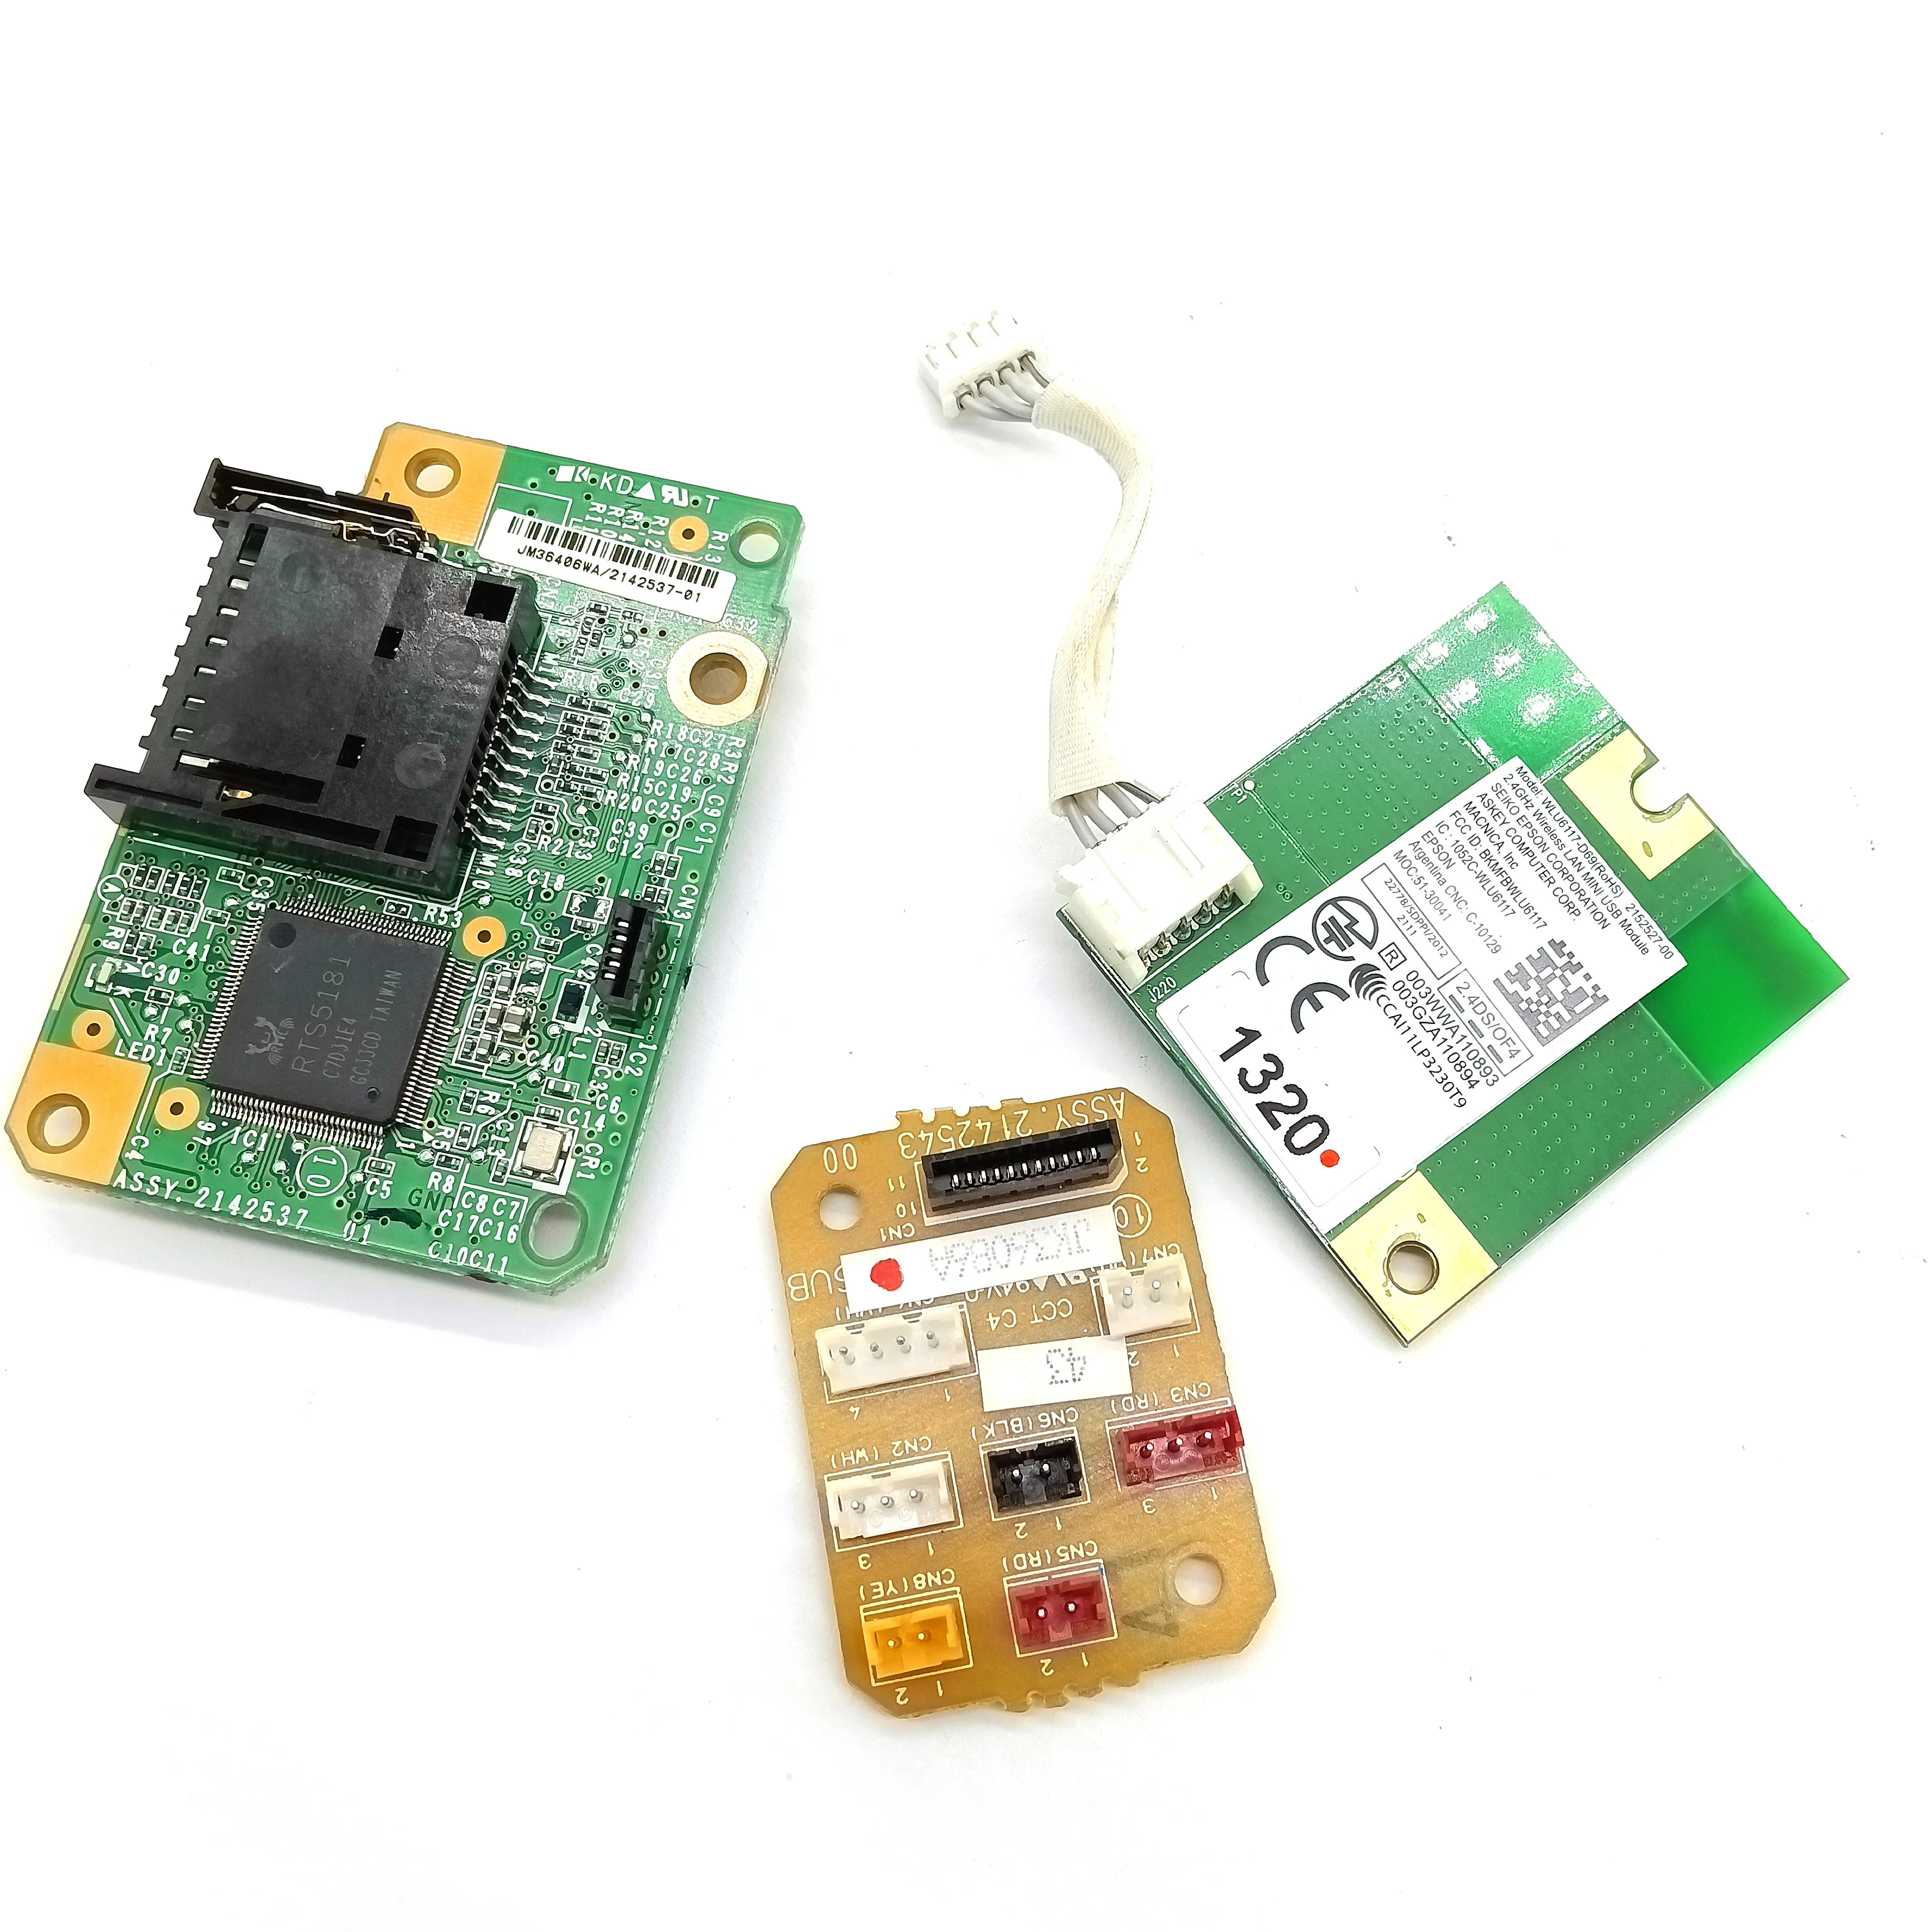 

SD Card & WIFI Board CD95 SUB ASSY Fits For Epson XP 721 897 810 625 700 800 615 600 801 620 720 610 630 701 821 601 750 605 640